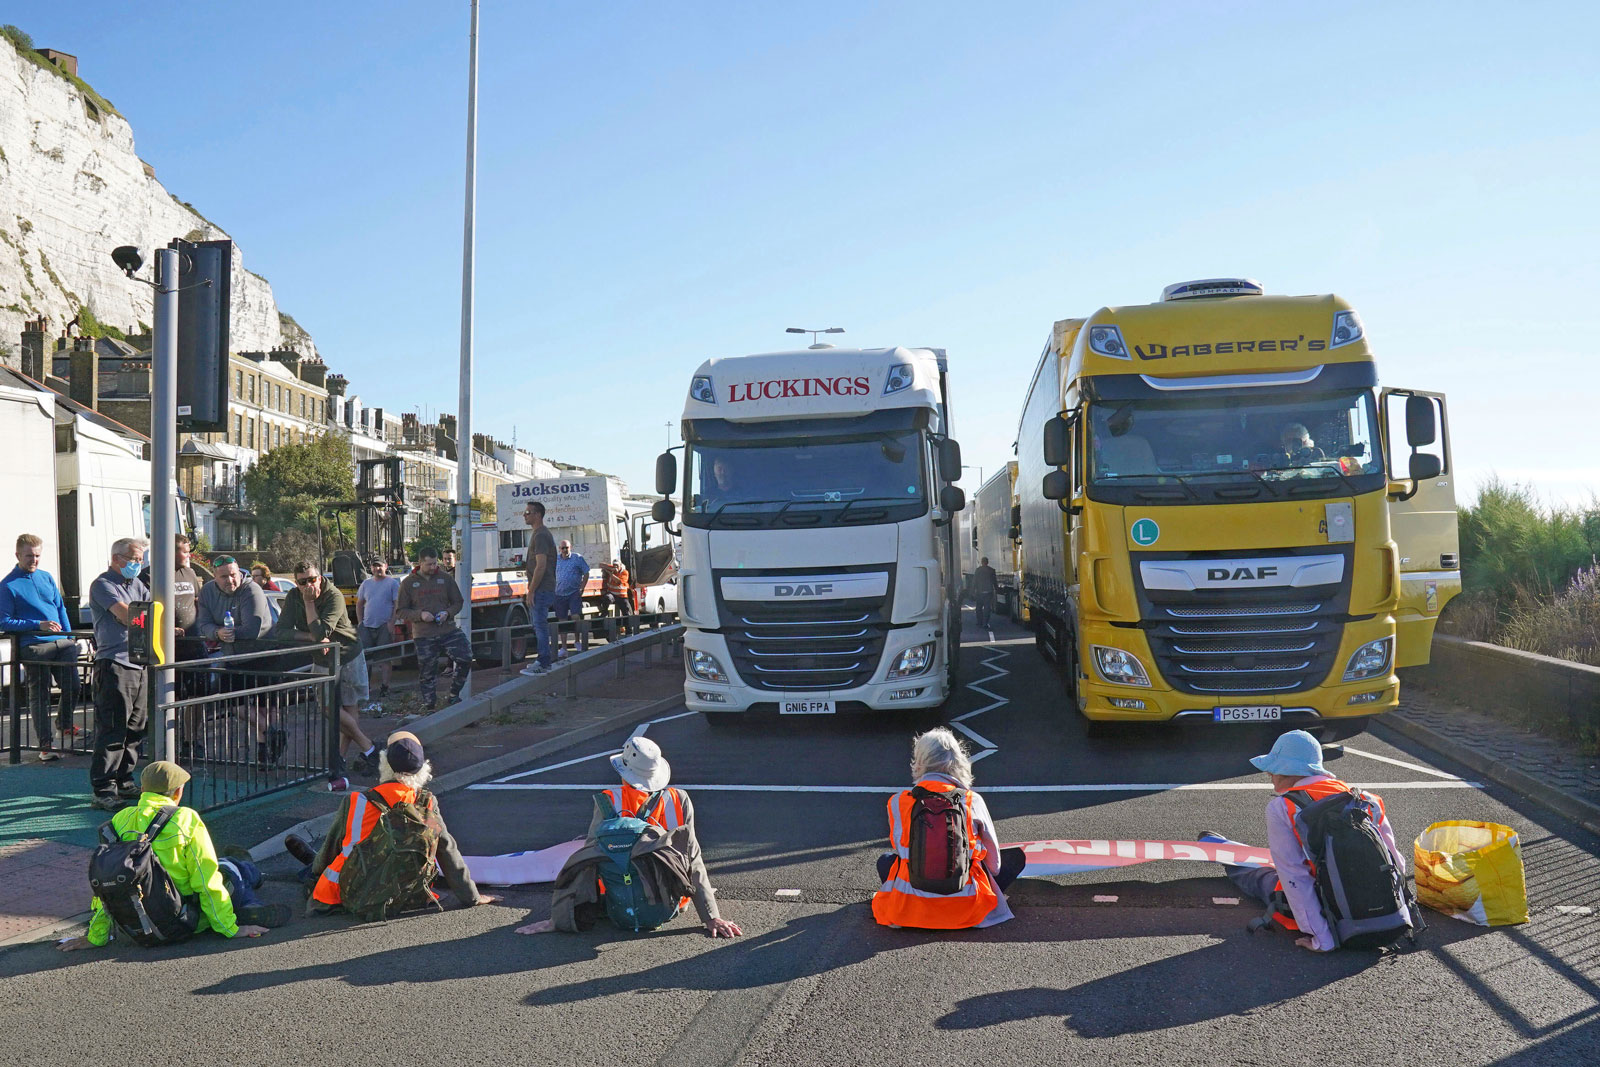 Protesters from Insulate Britain block the A20 which provides access to the Port of Dover, in Kent, England on Friday, Sept. 24.